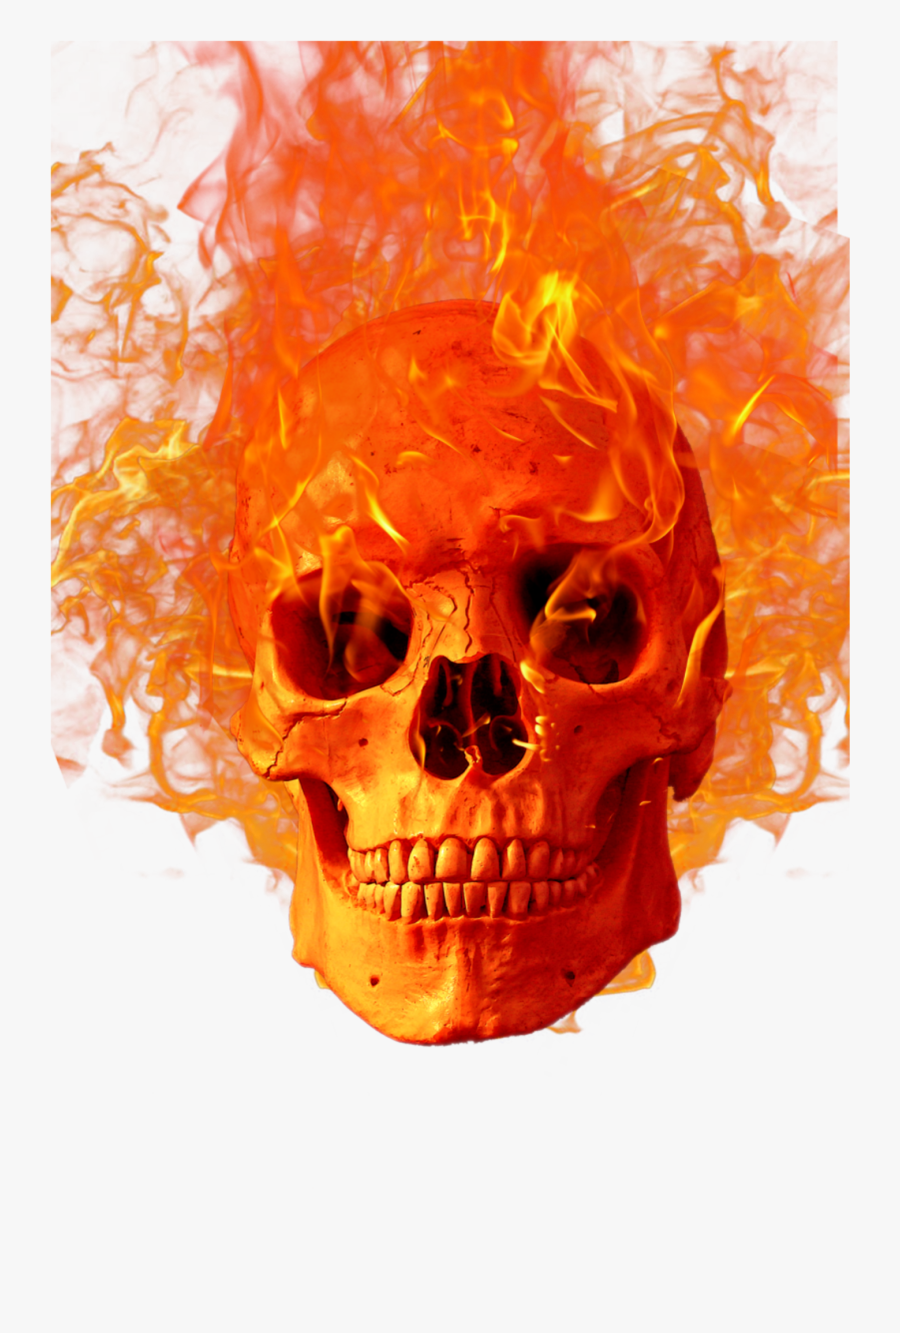 #mq #skull #fire #fireflames #flames - Skull With Flames Png, Transparent Clipart